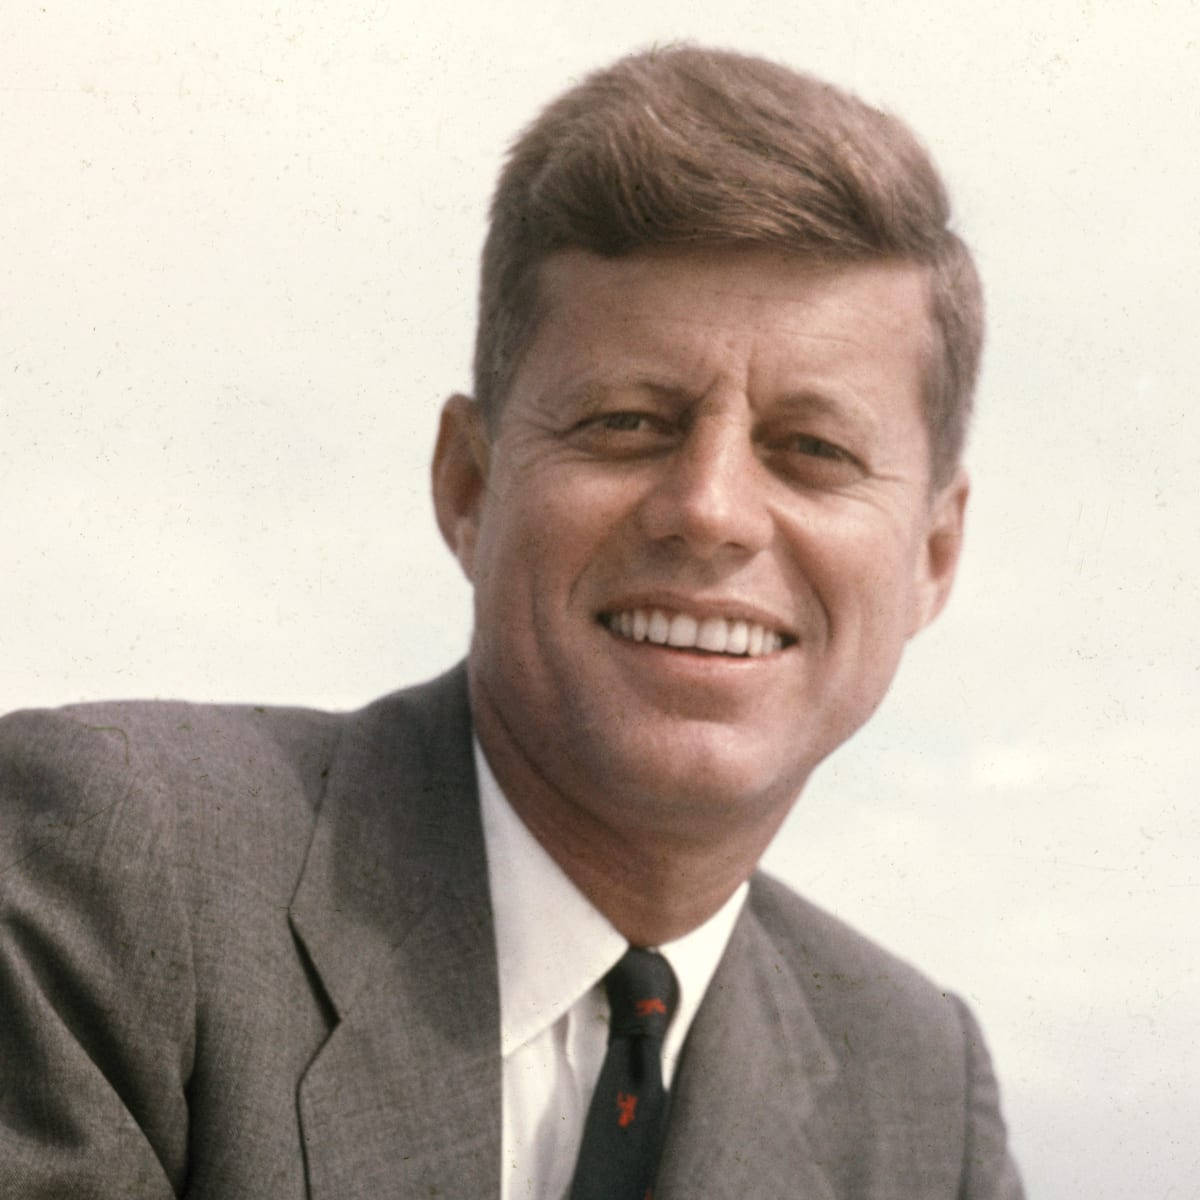 Brown-haired John F. Kennedy Background